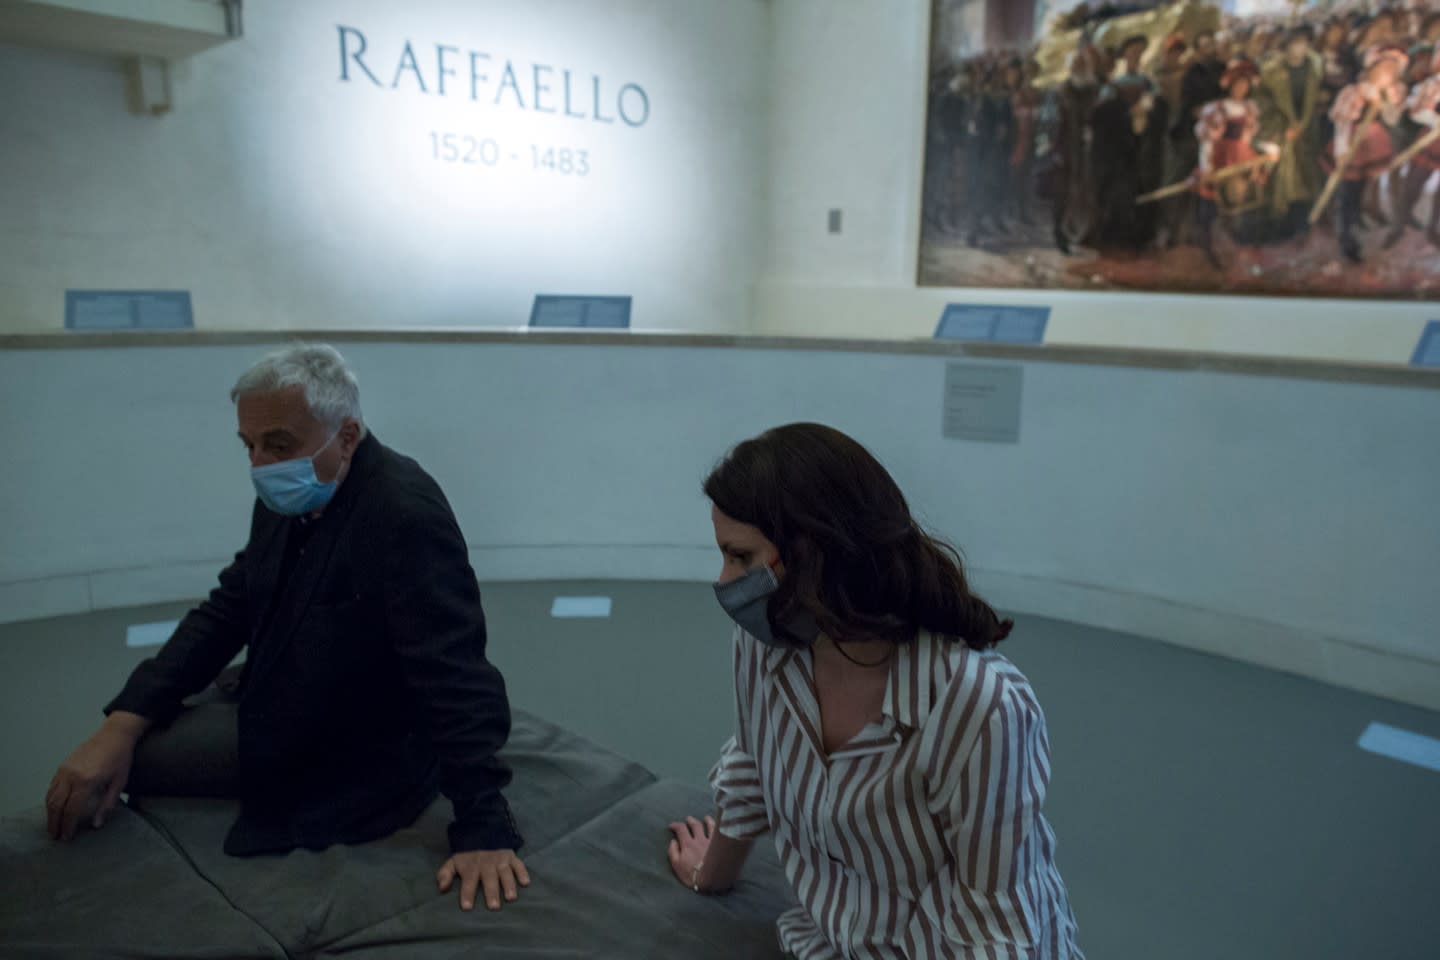 A massive Raphael exhibit reopens in Rome. Six people can enter every five minutes.